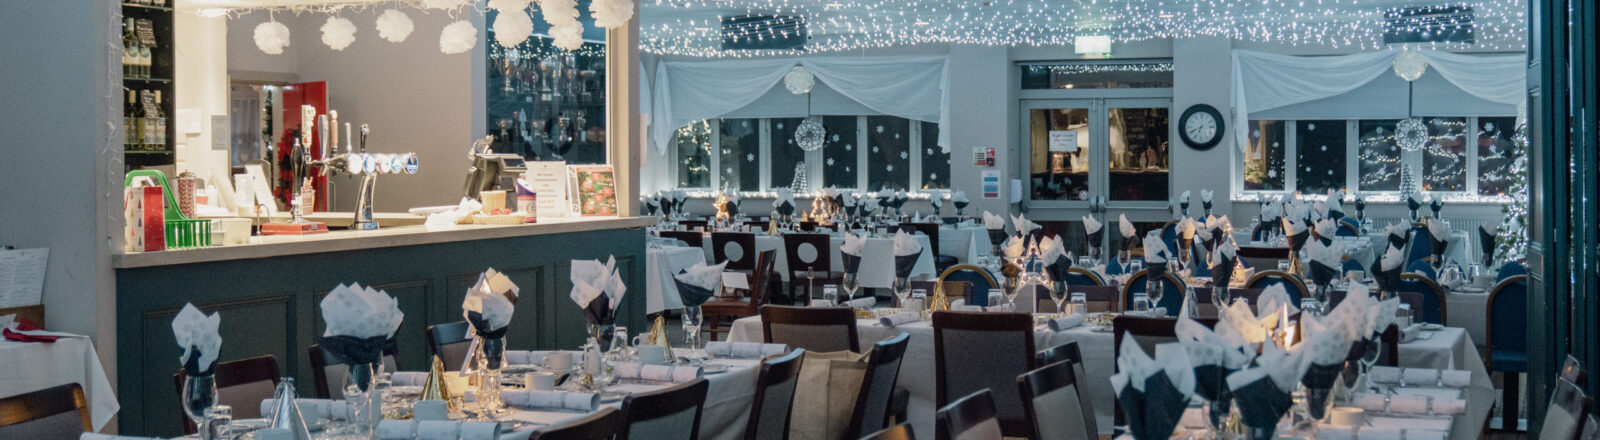 Redbourn Golf Club dressed up for Christmas Parties